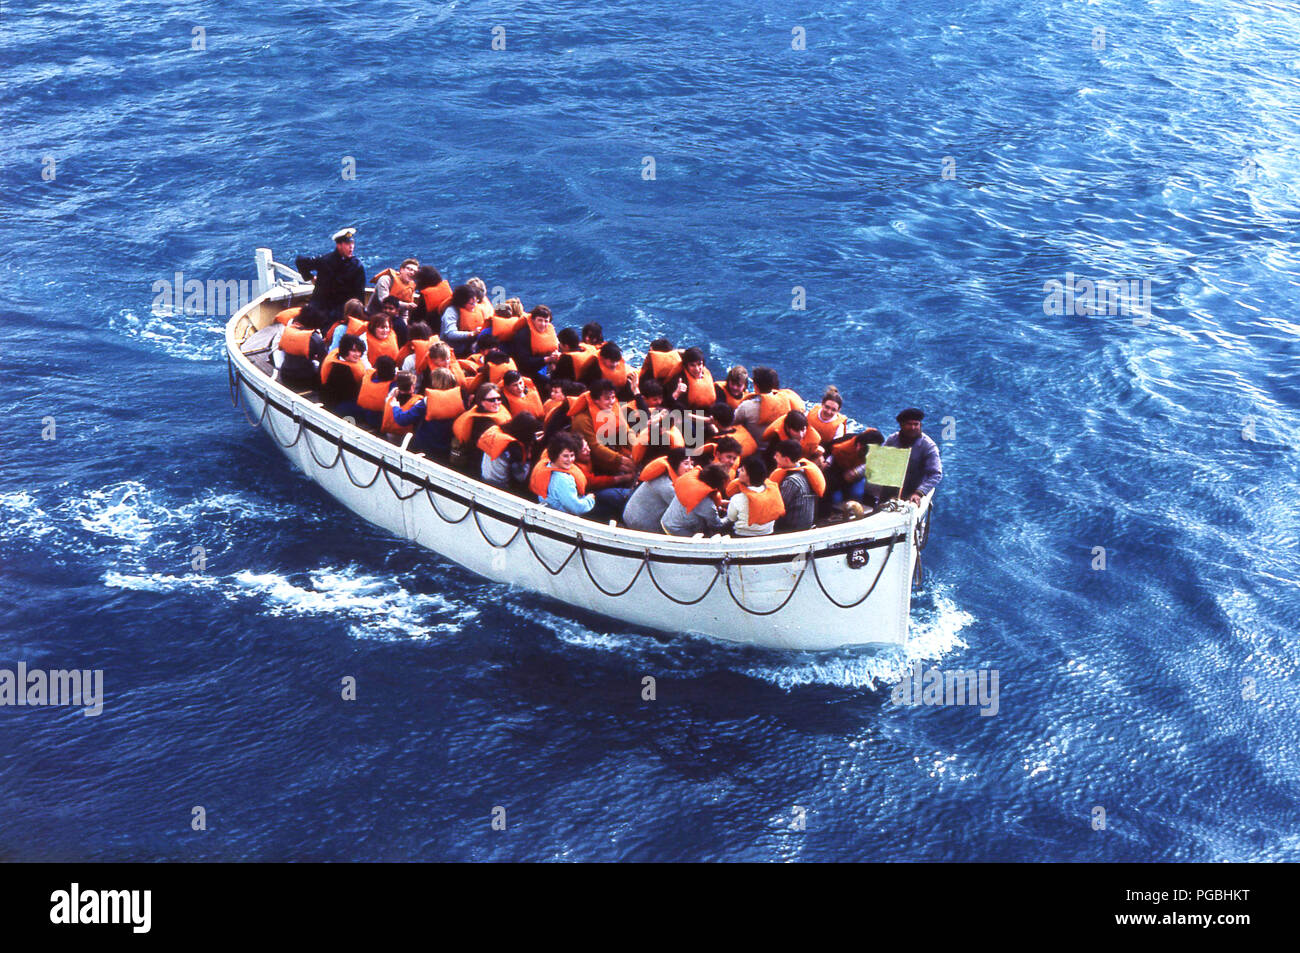 1970s, historical, cruise passengers with orange coloured life jackets, out at sea on a lifeboat taking part in a ship's life safety drill. Stock Photo